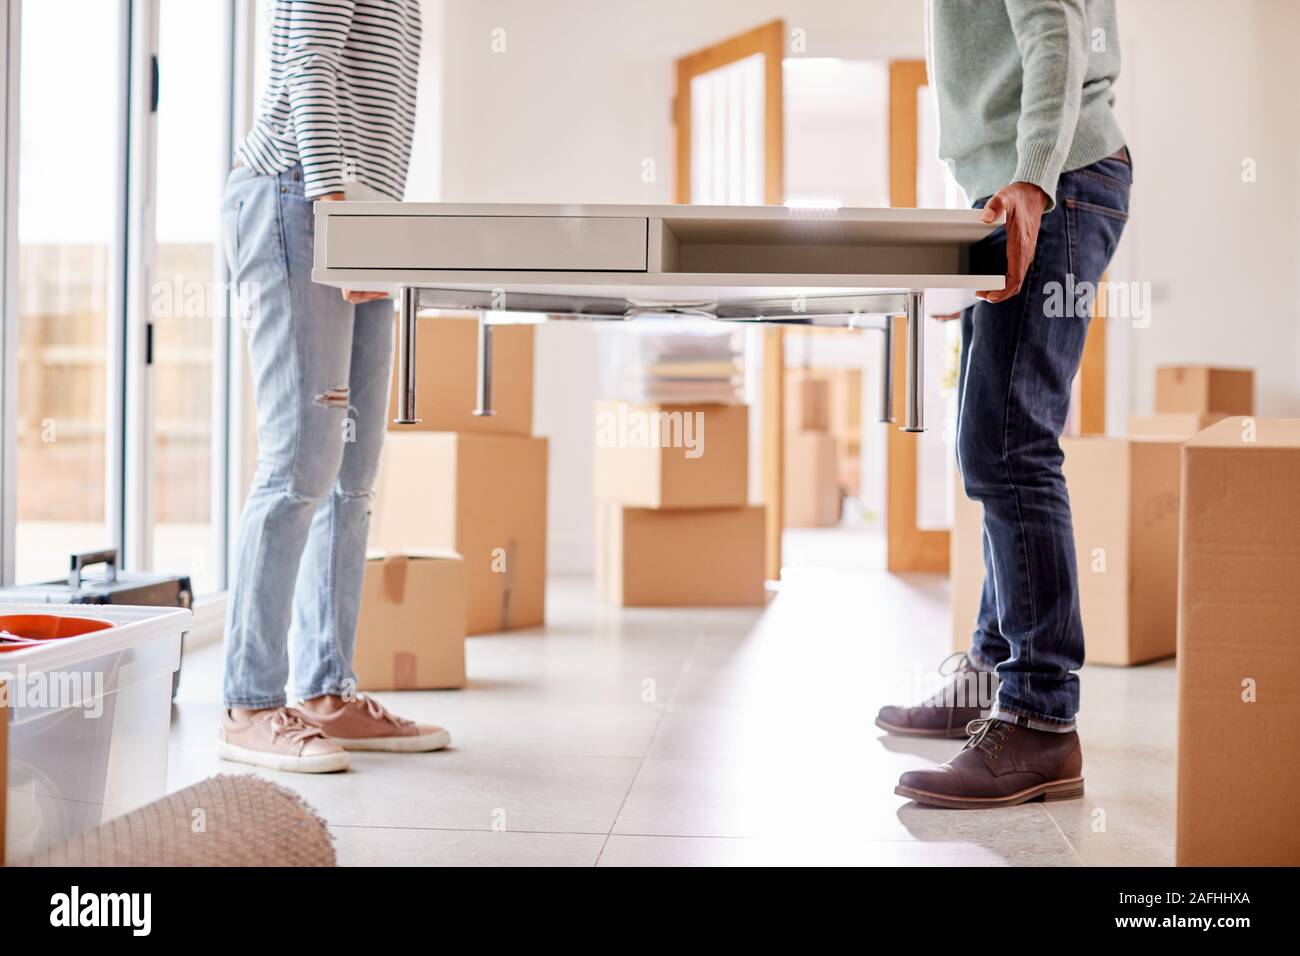 Close Up Of Couple In New Home On Moving Day Carrying Table Together Stock Photo